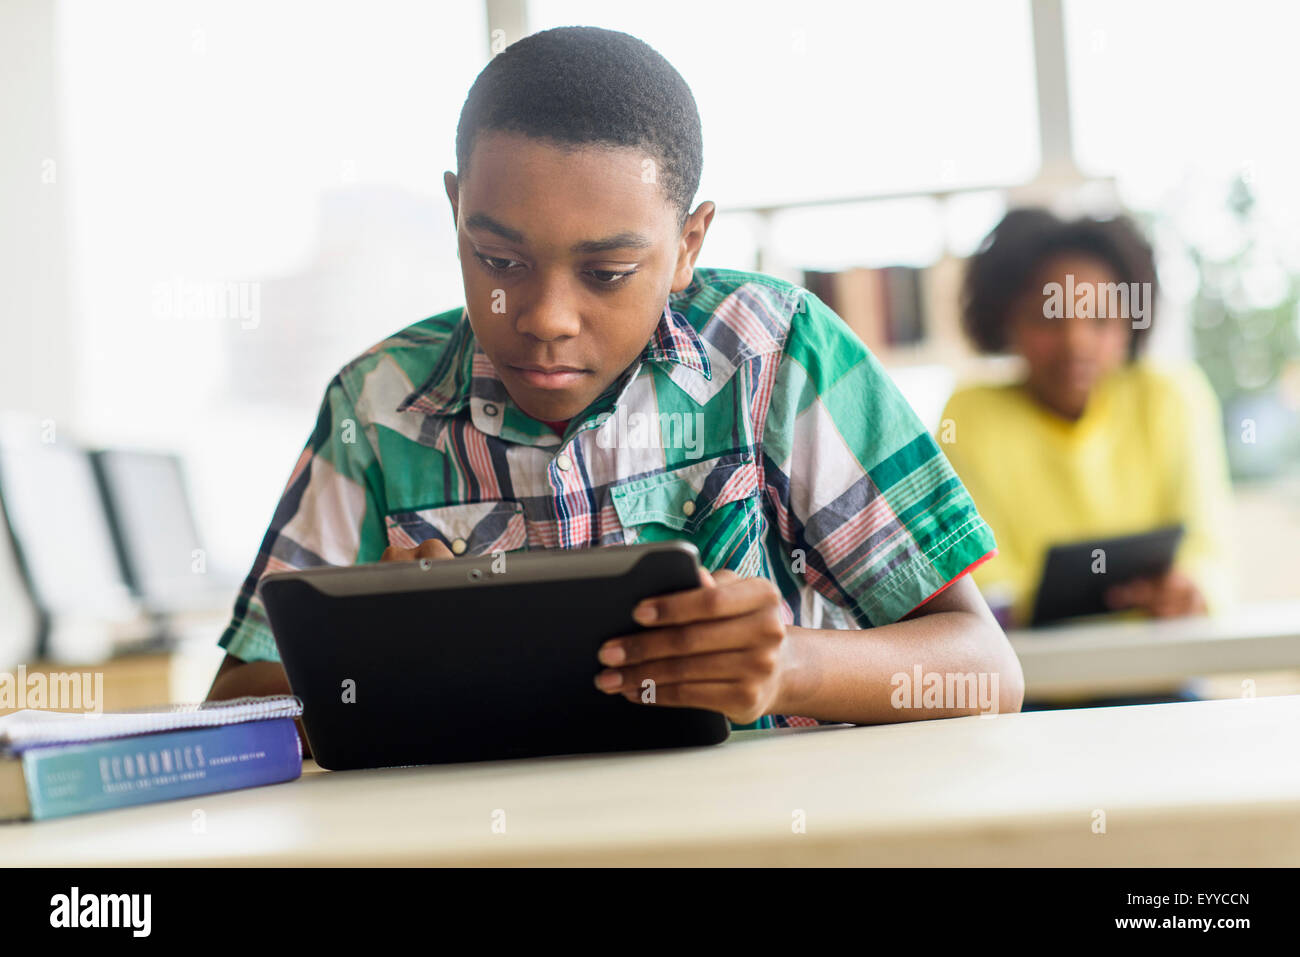 Black student using digital tablet in classroom Stock Photo